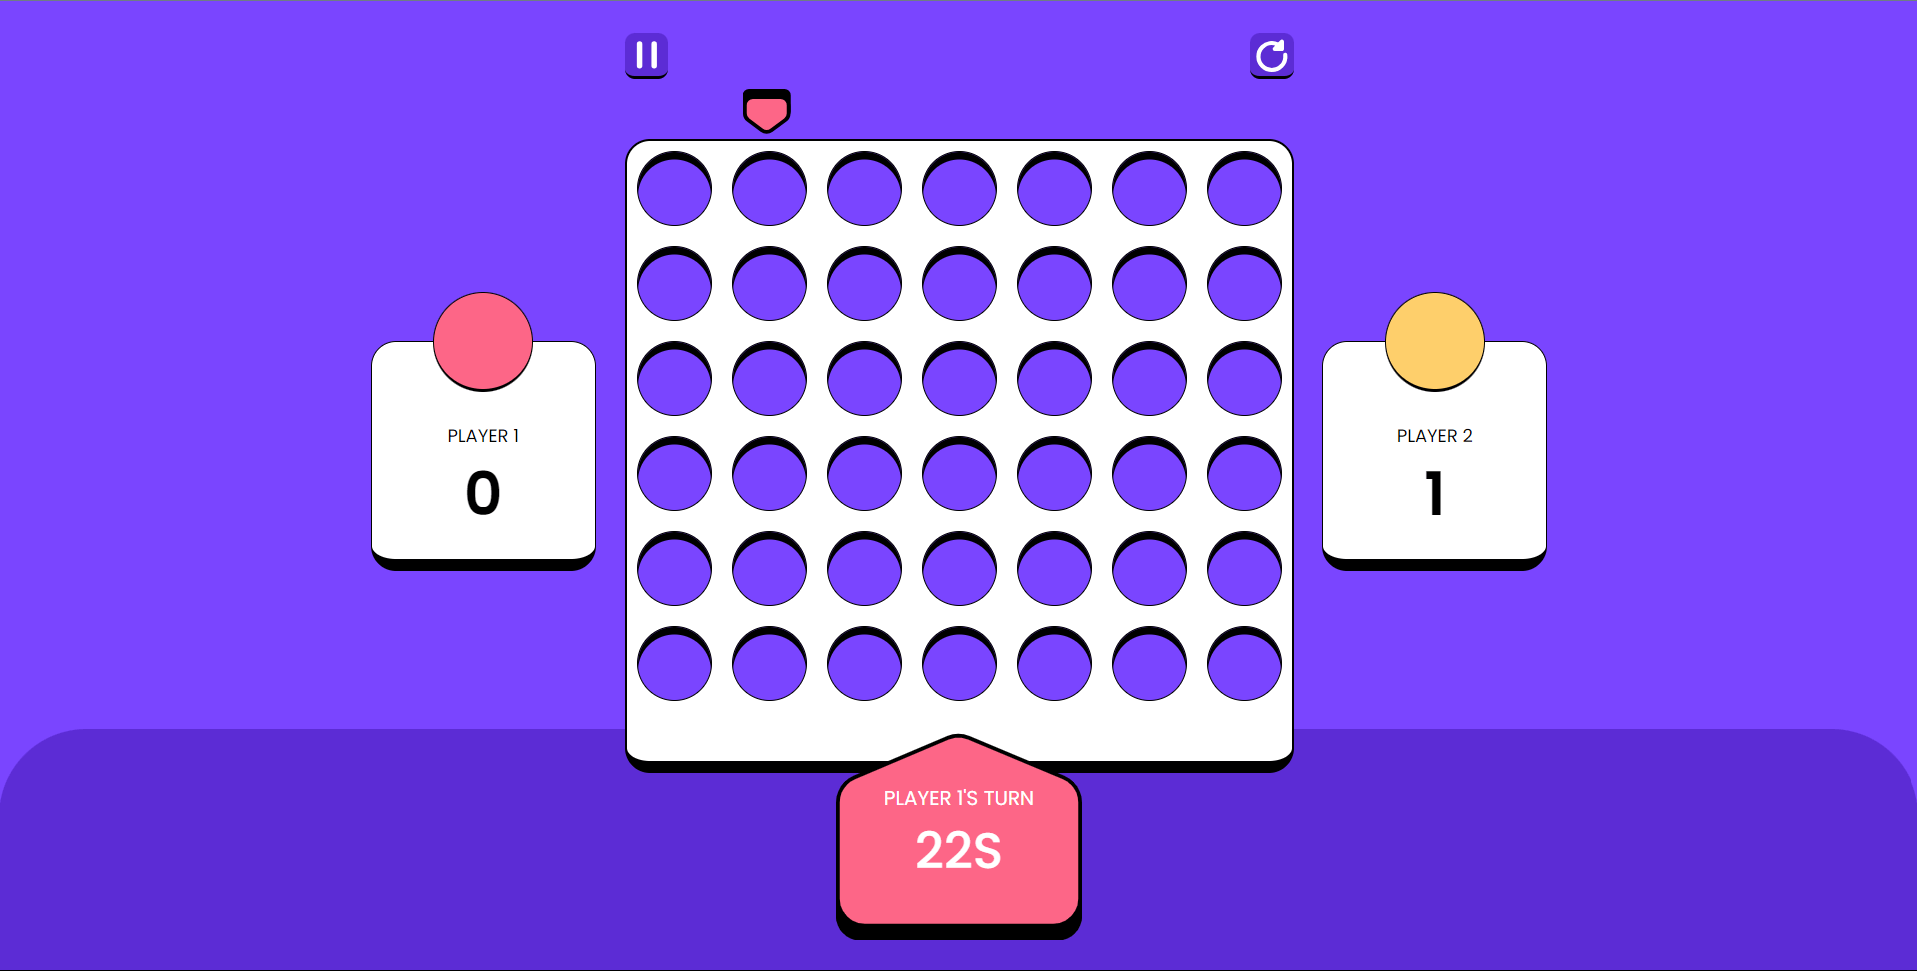 connect four game screenshot